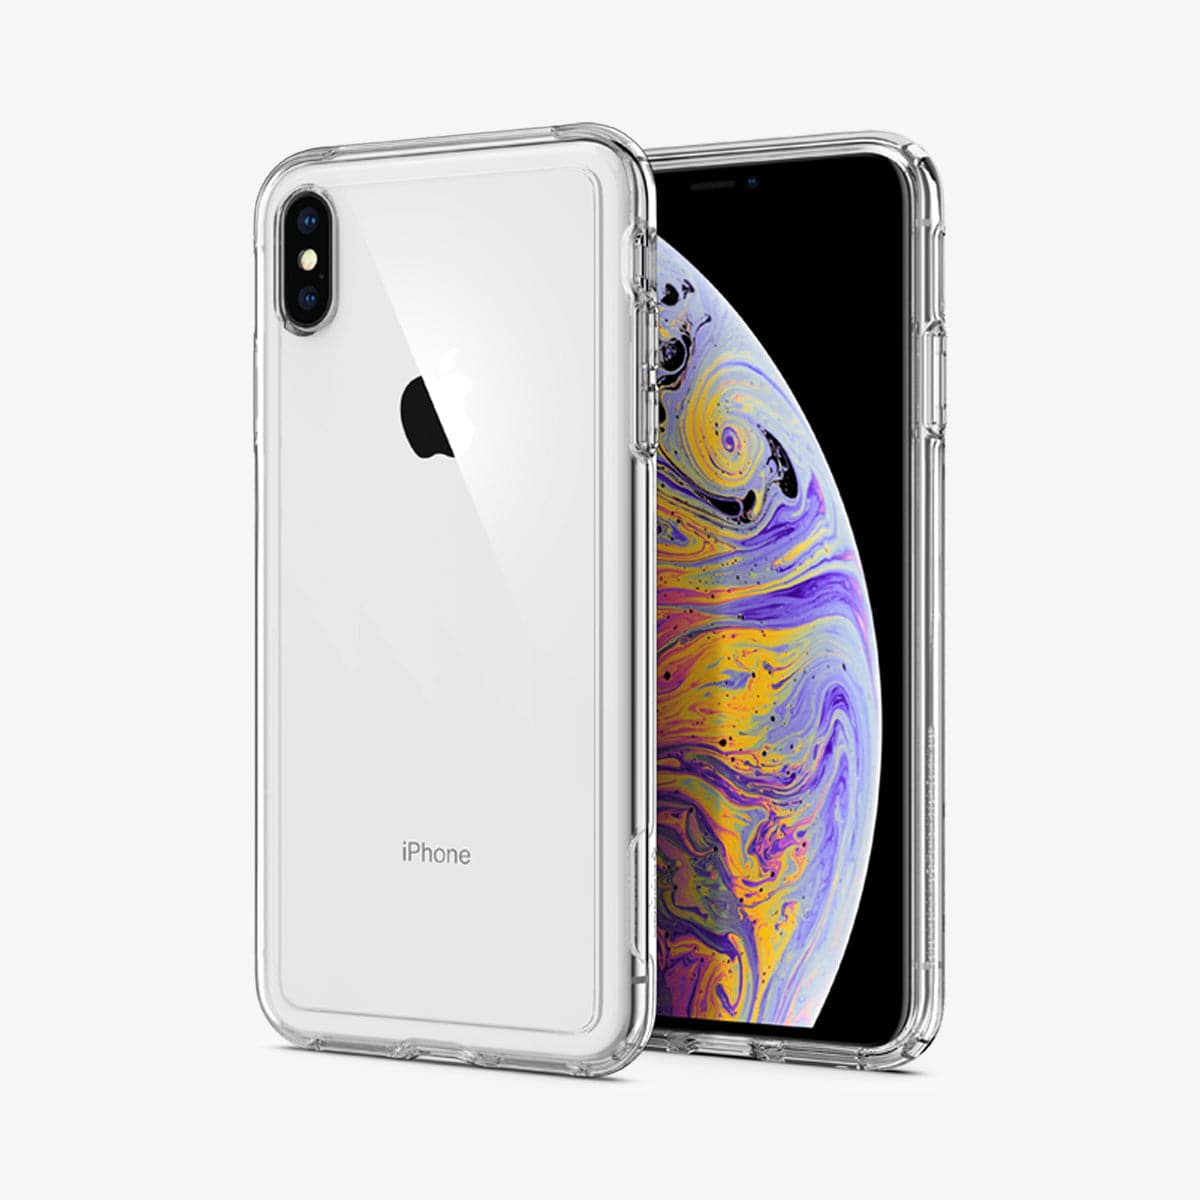 065CS24548 - iPhone XS Max Case Slim Armor Crystal in crystal clear showing the back and front